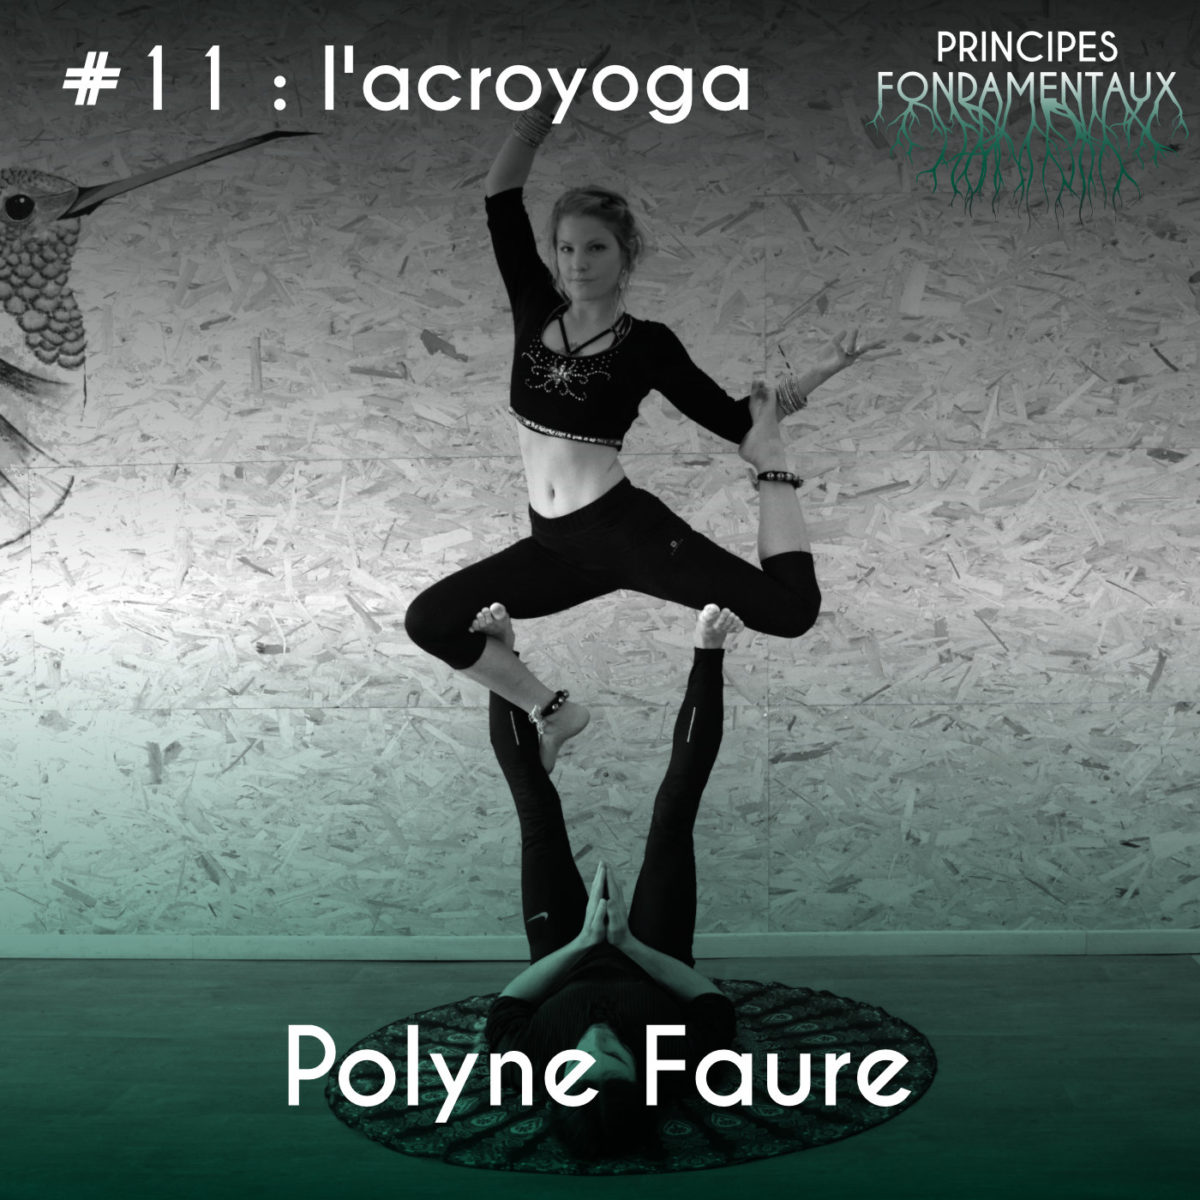 Couverture Podcast #11 Polyne Faure